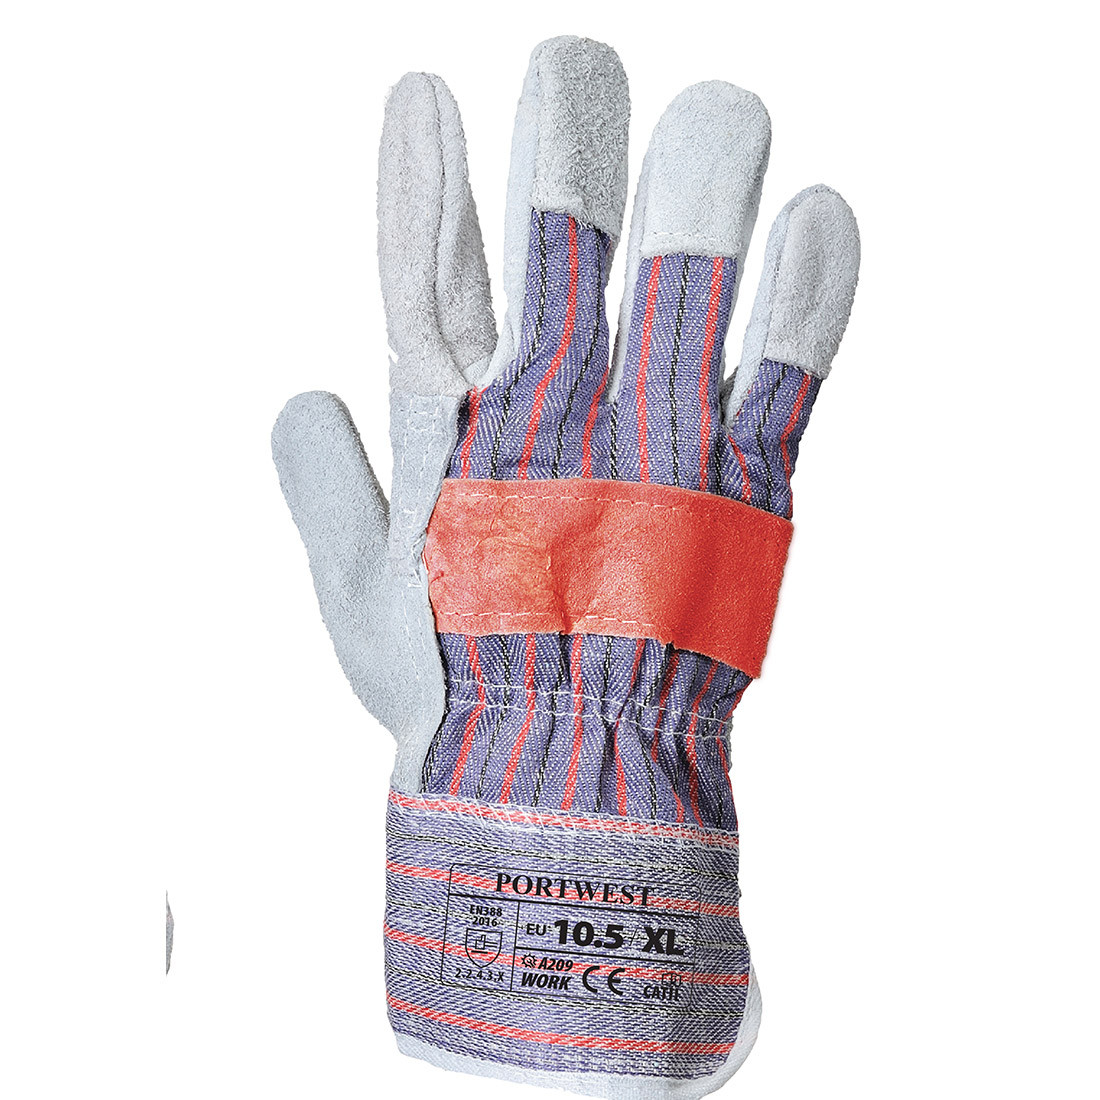 Classic Canadian Rigger Glove - Personal protection